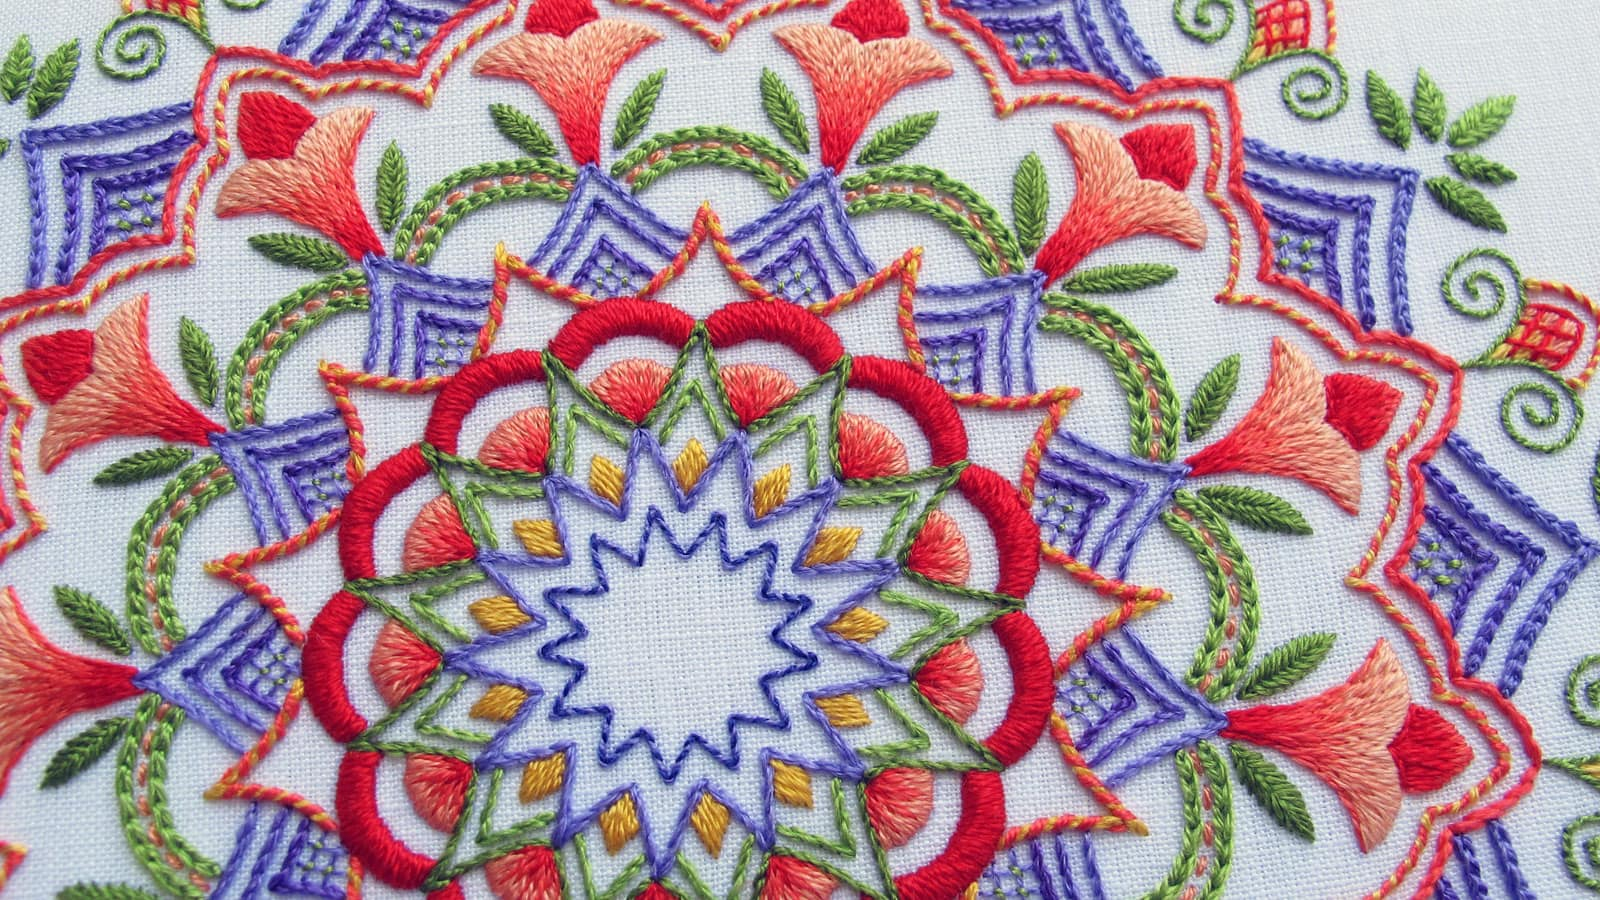 Free Paper Embroidery Patterns And Instructions Needlenthread Tips Tricks And Great Resources For Hand Embroidery